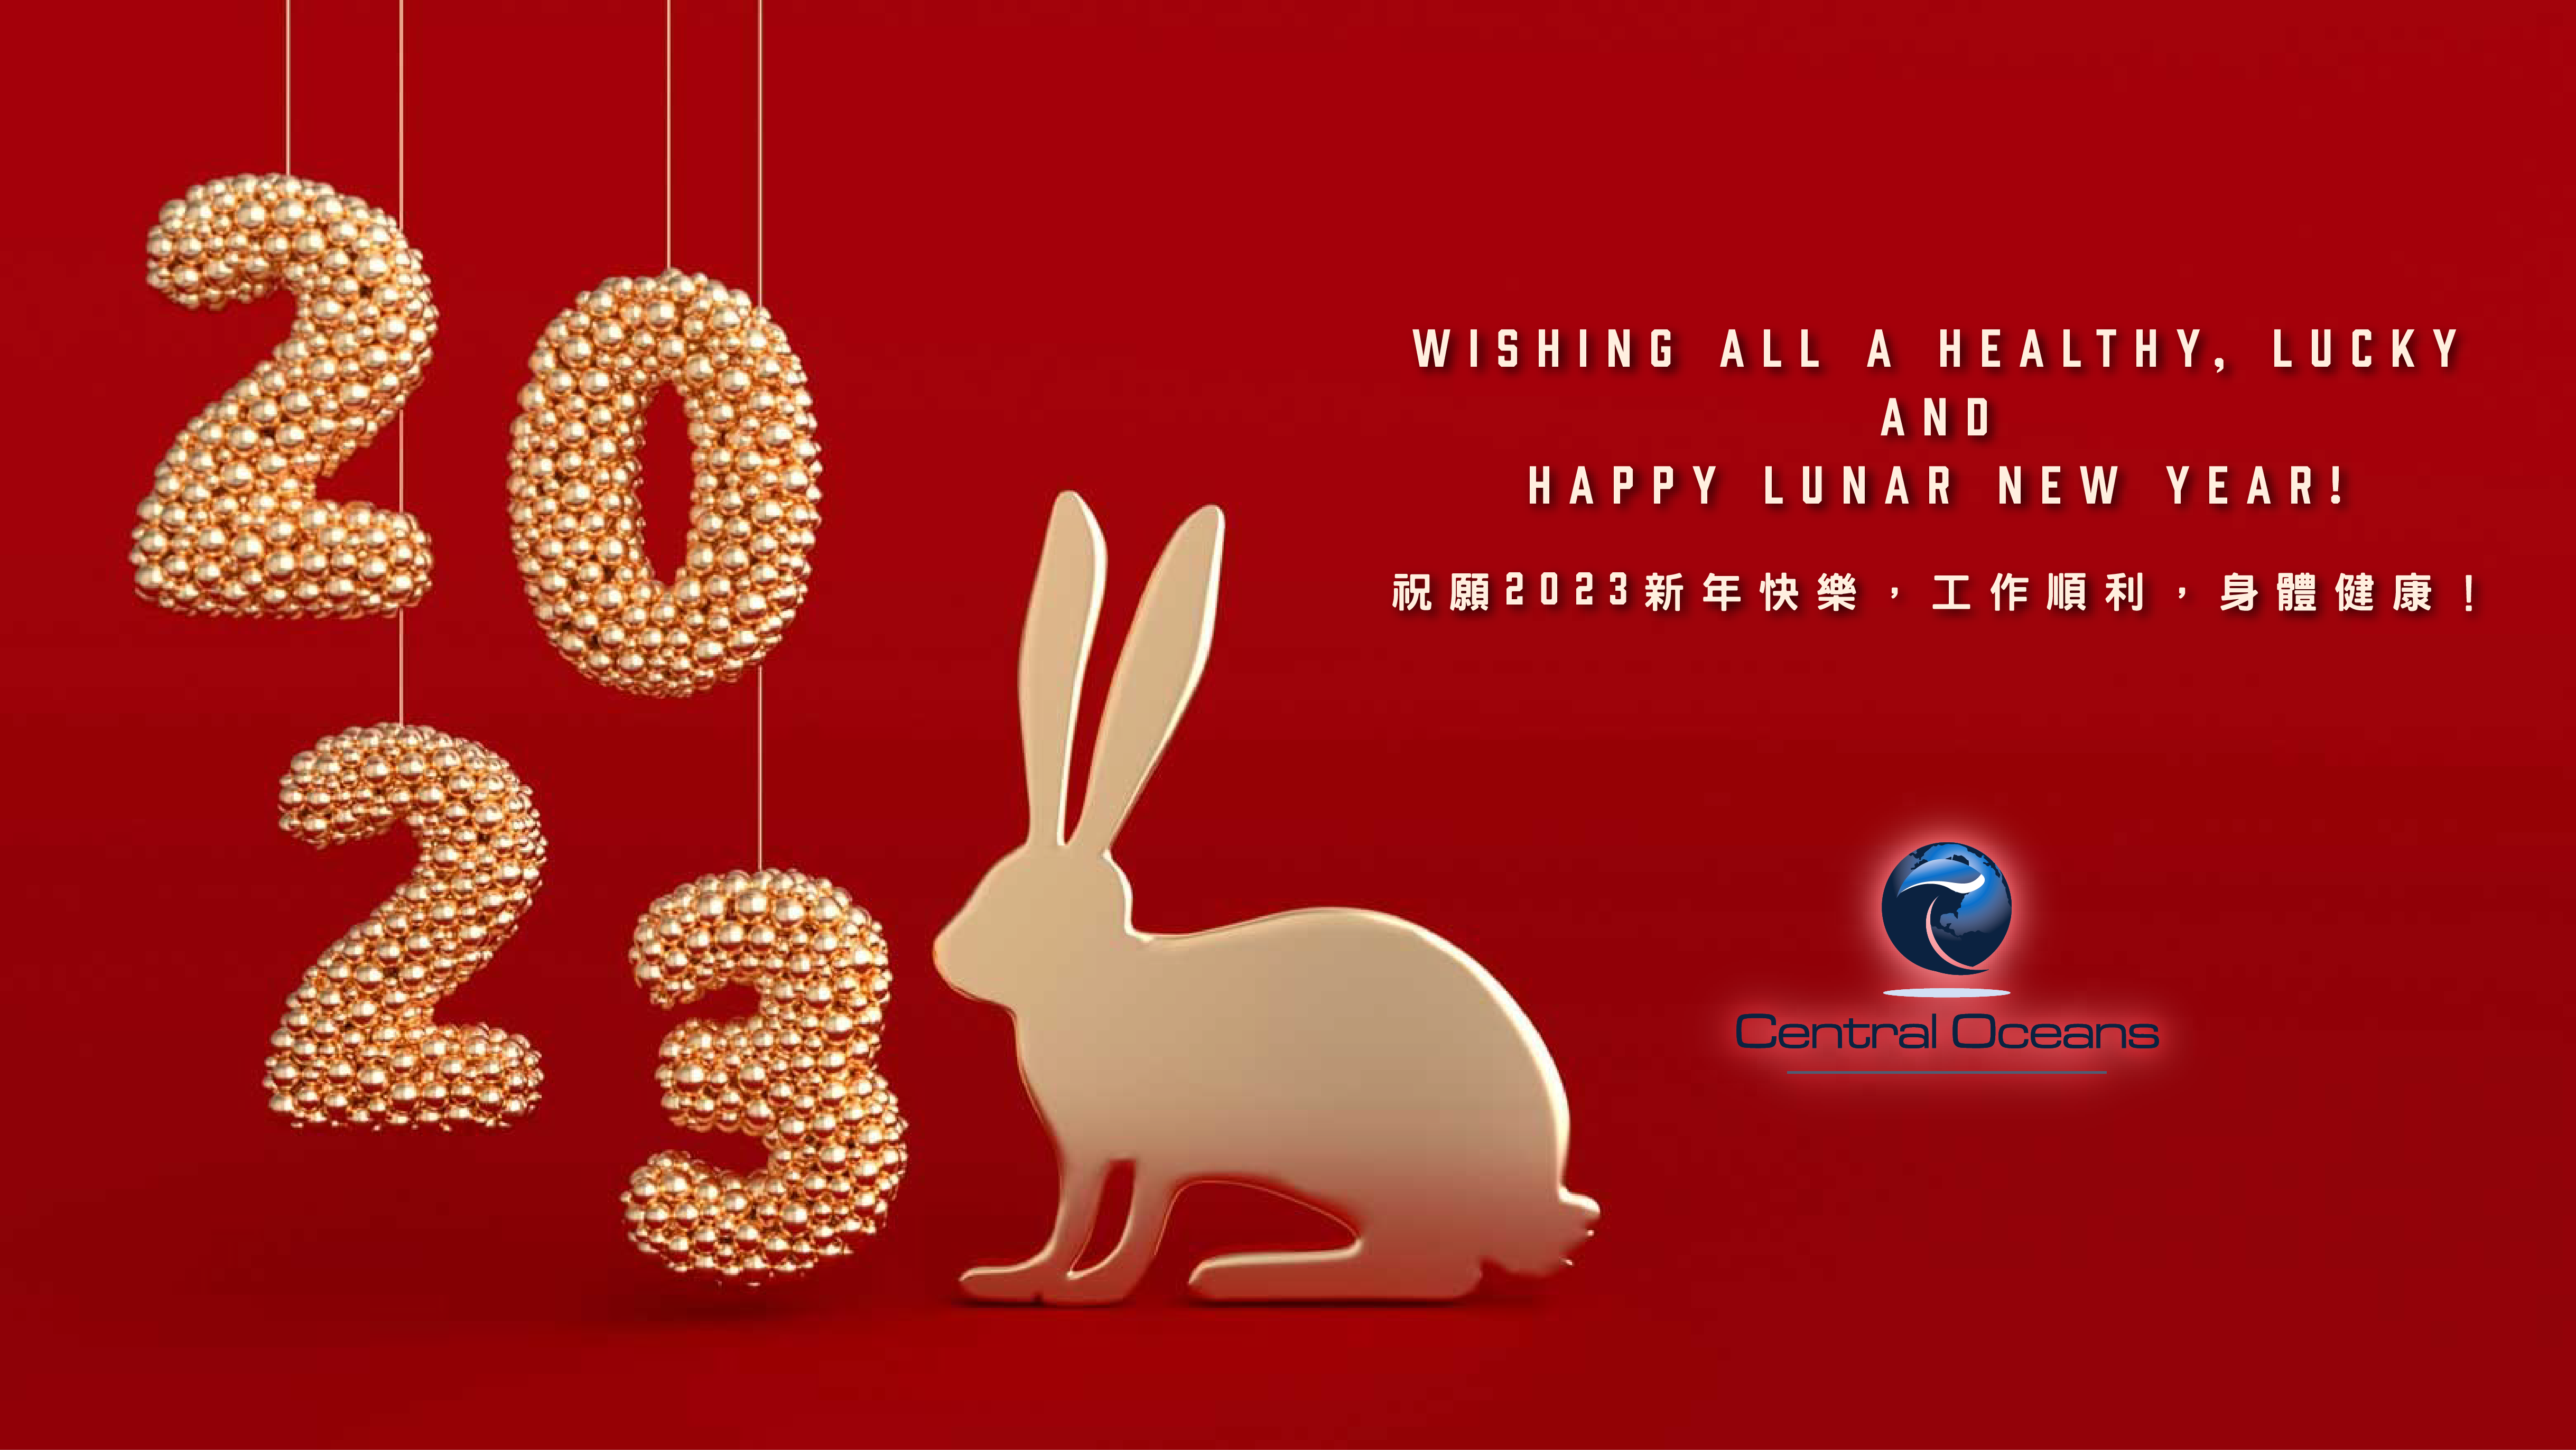 Wishing all a healthy, lucky and happy Lunar New Year!